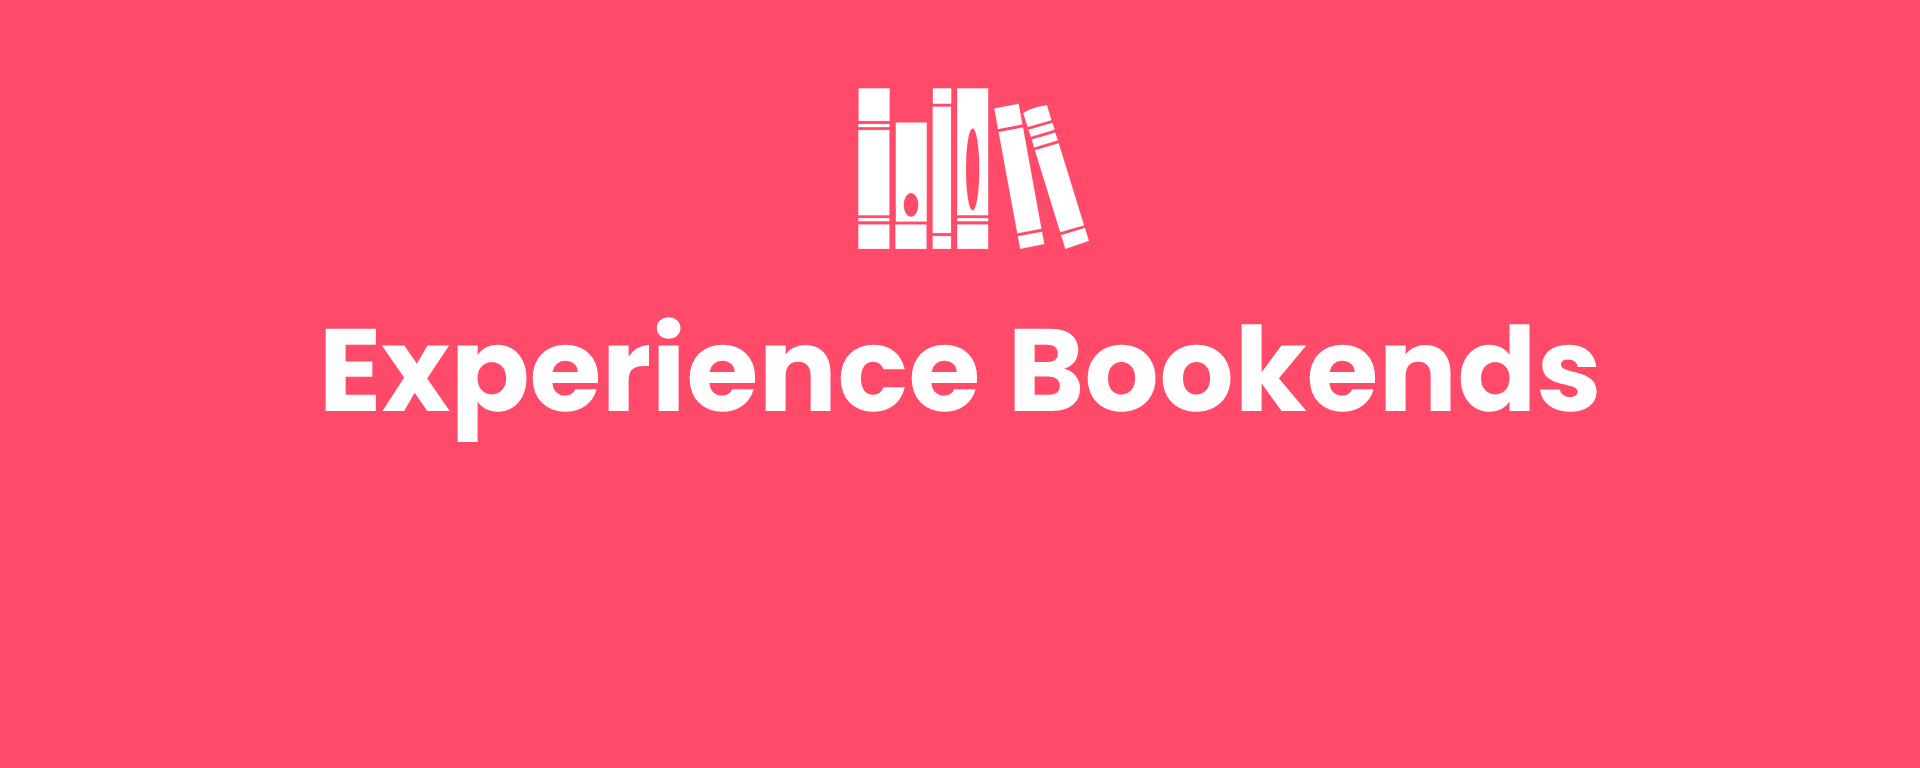 Experience Bookends